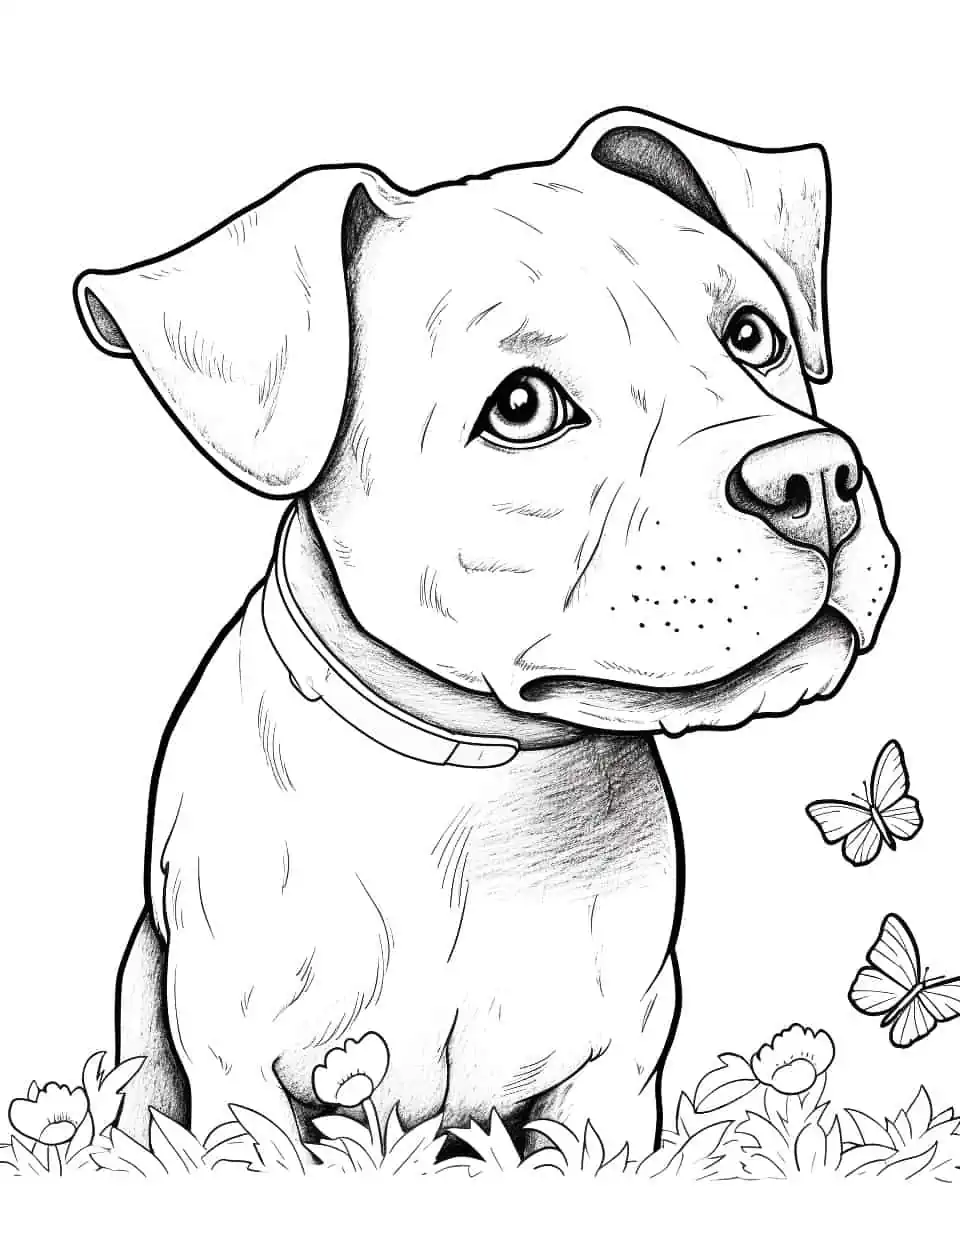 Pitbull and the Butterfly Dog Coloring Page - A pitbull curiously watching a butterfly flying in the garden.